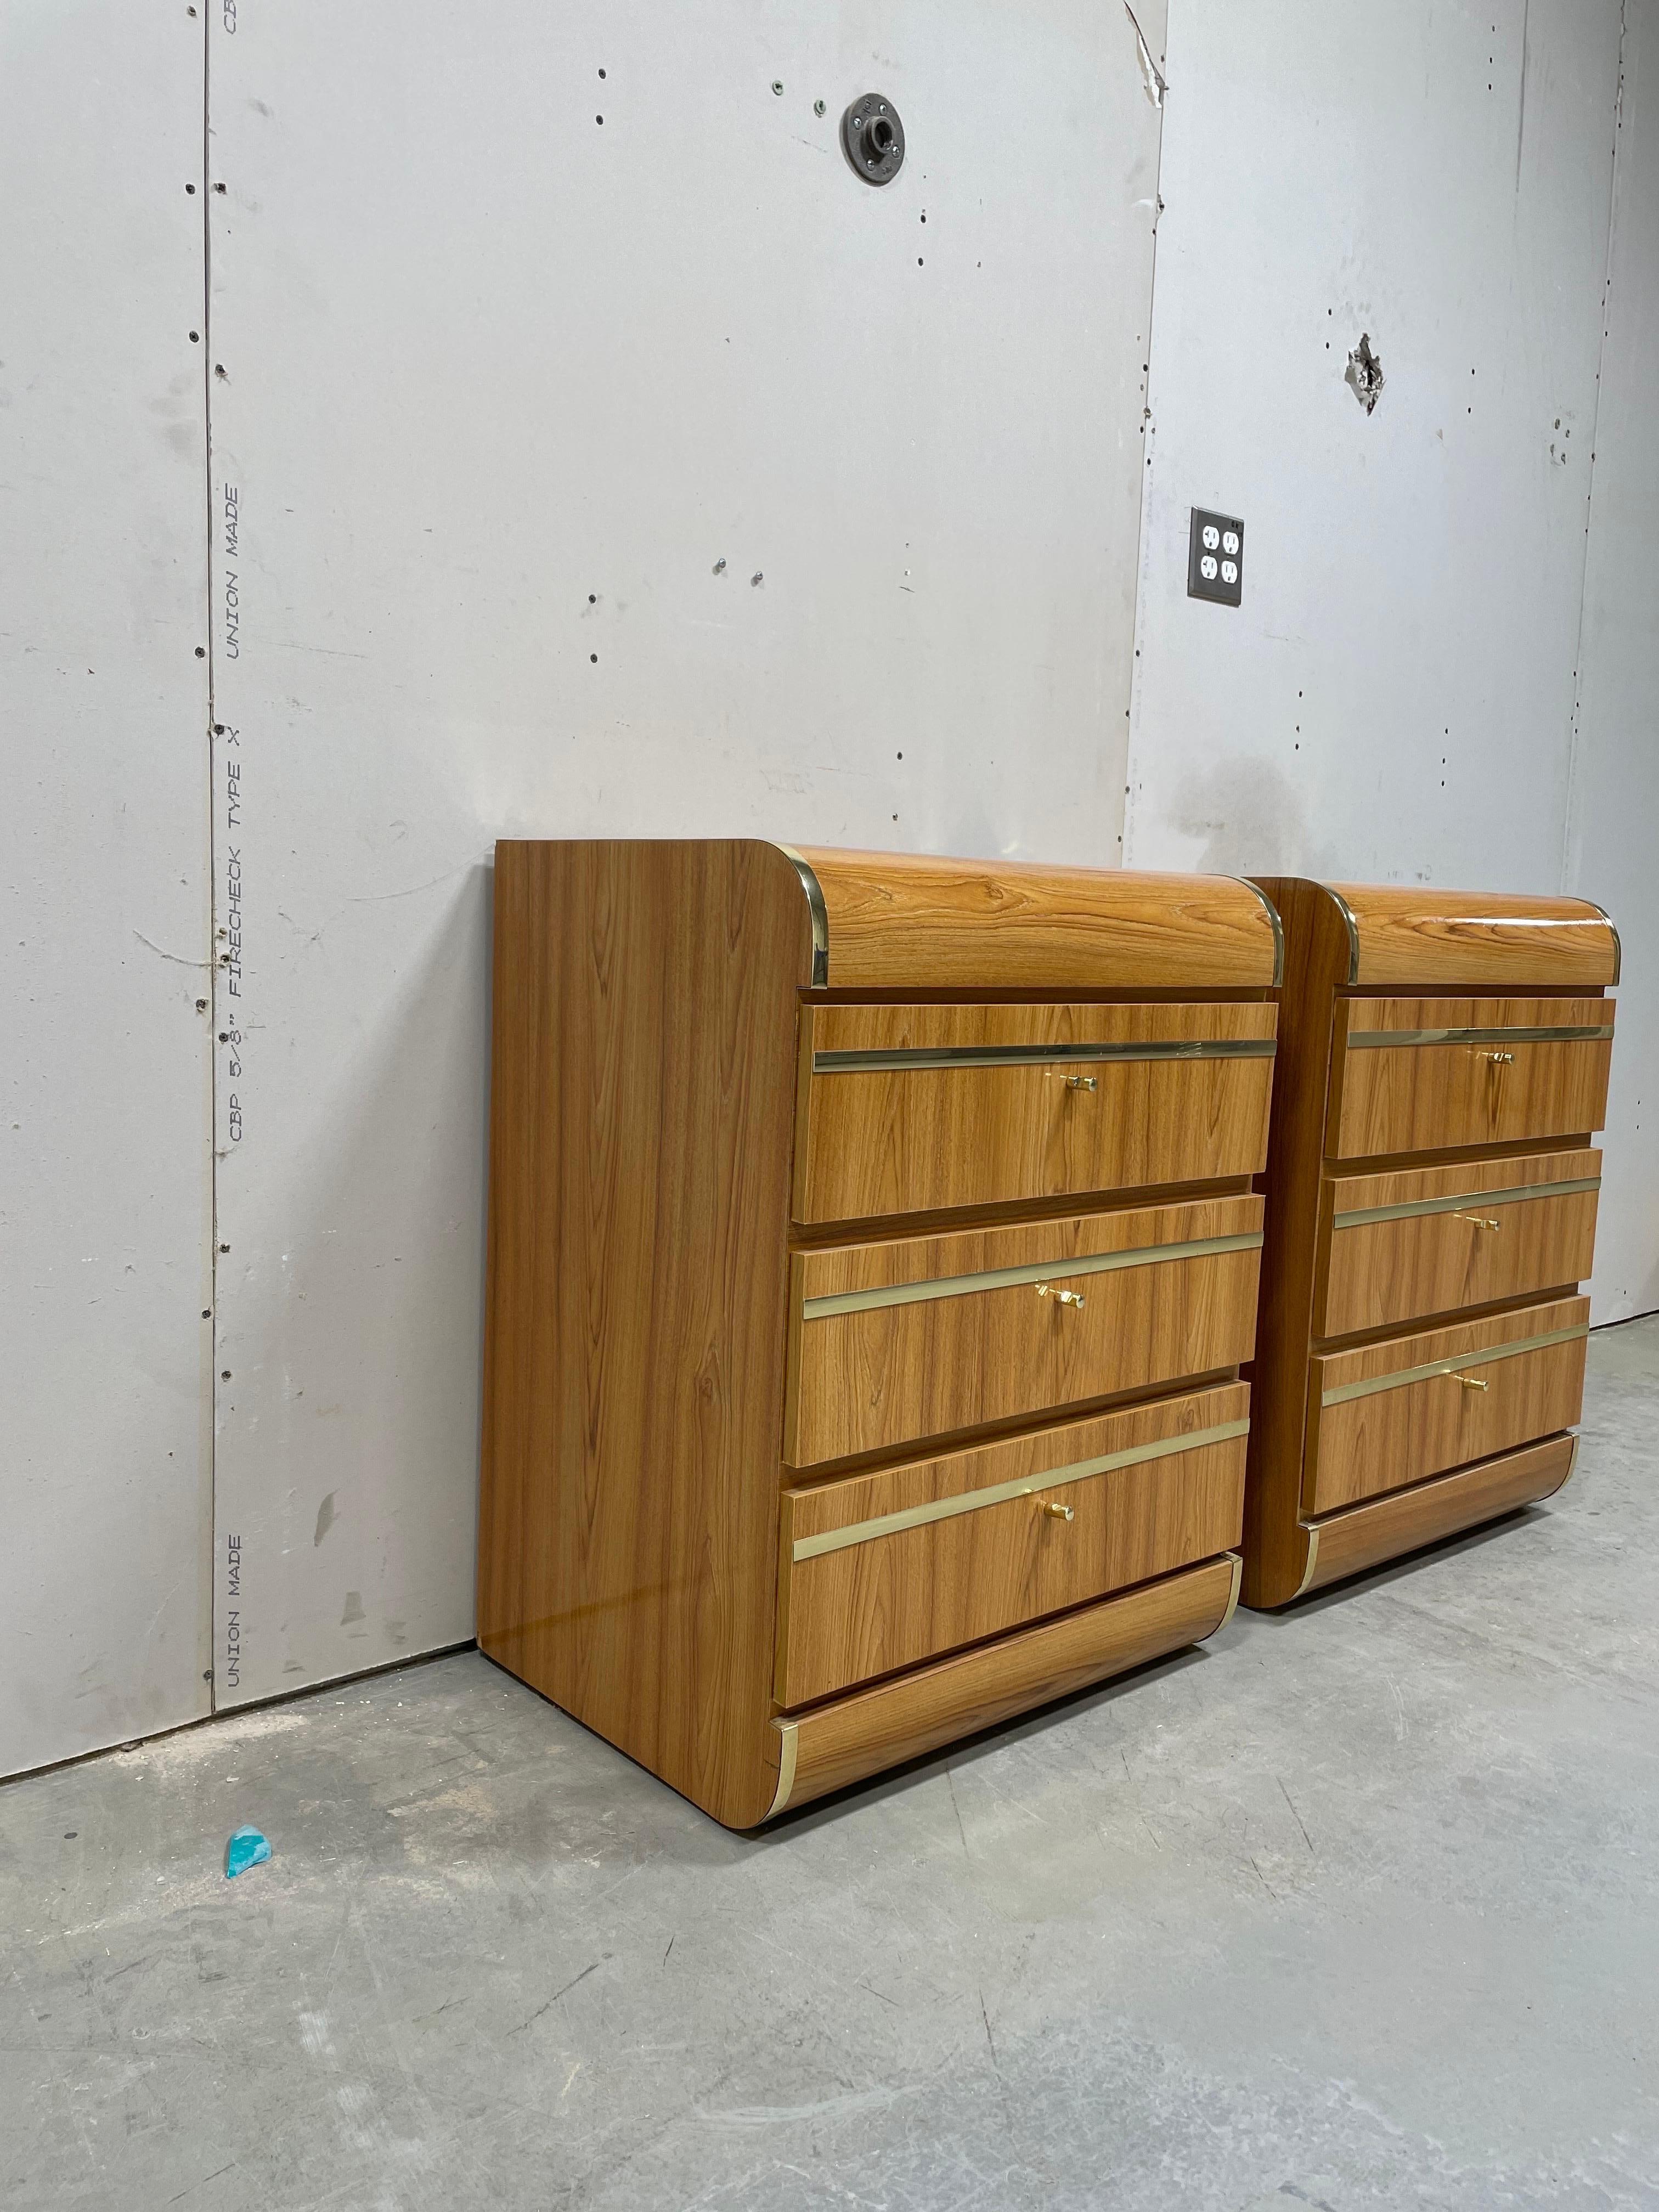 Beautiful waterfall nightstands. Nicely grained veneer laminate with brass trim and drawer pulls. 3 Drawer design for ample storage. 
Curbside delivery up to 75 miles from 07711 - $300.